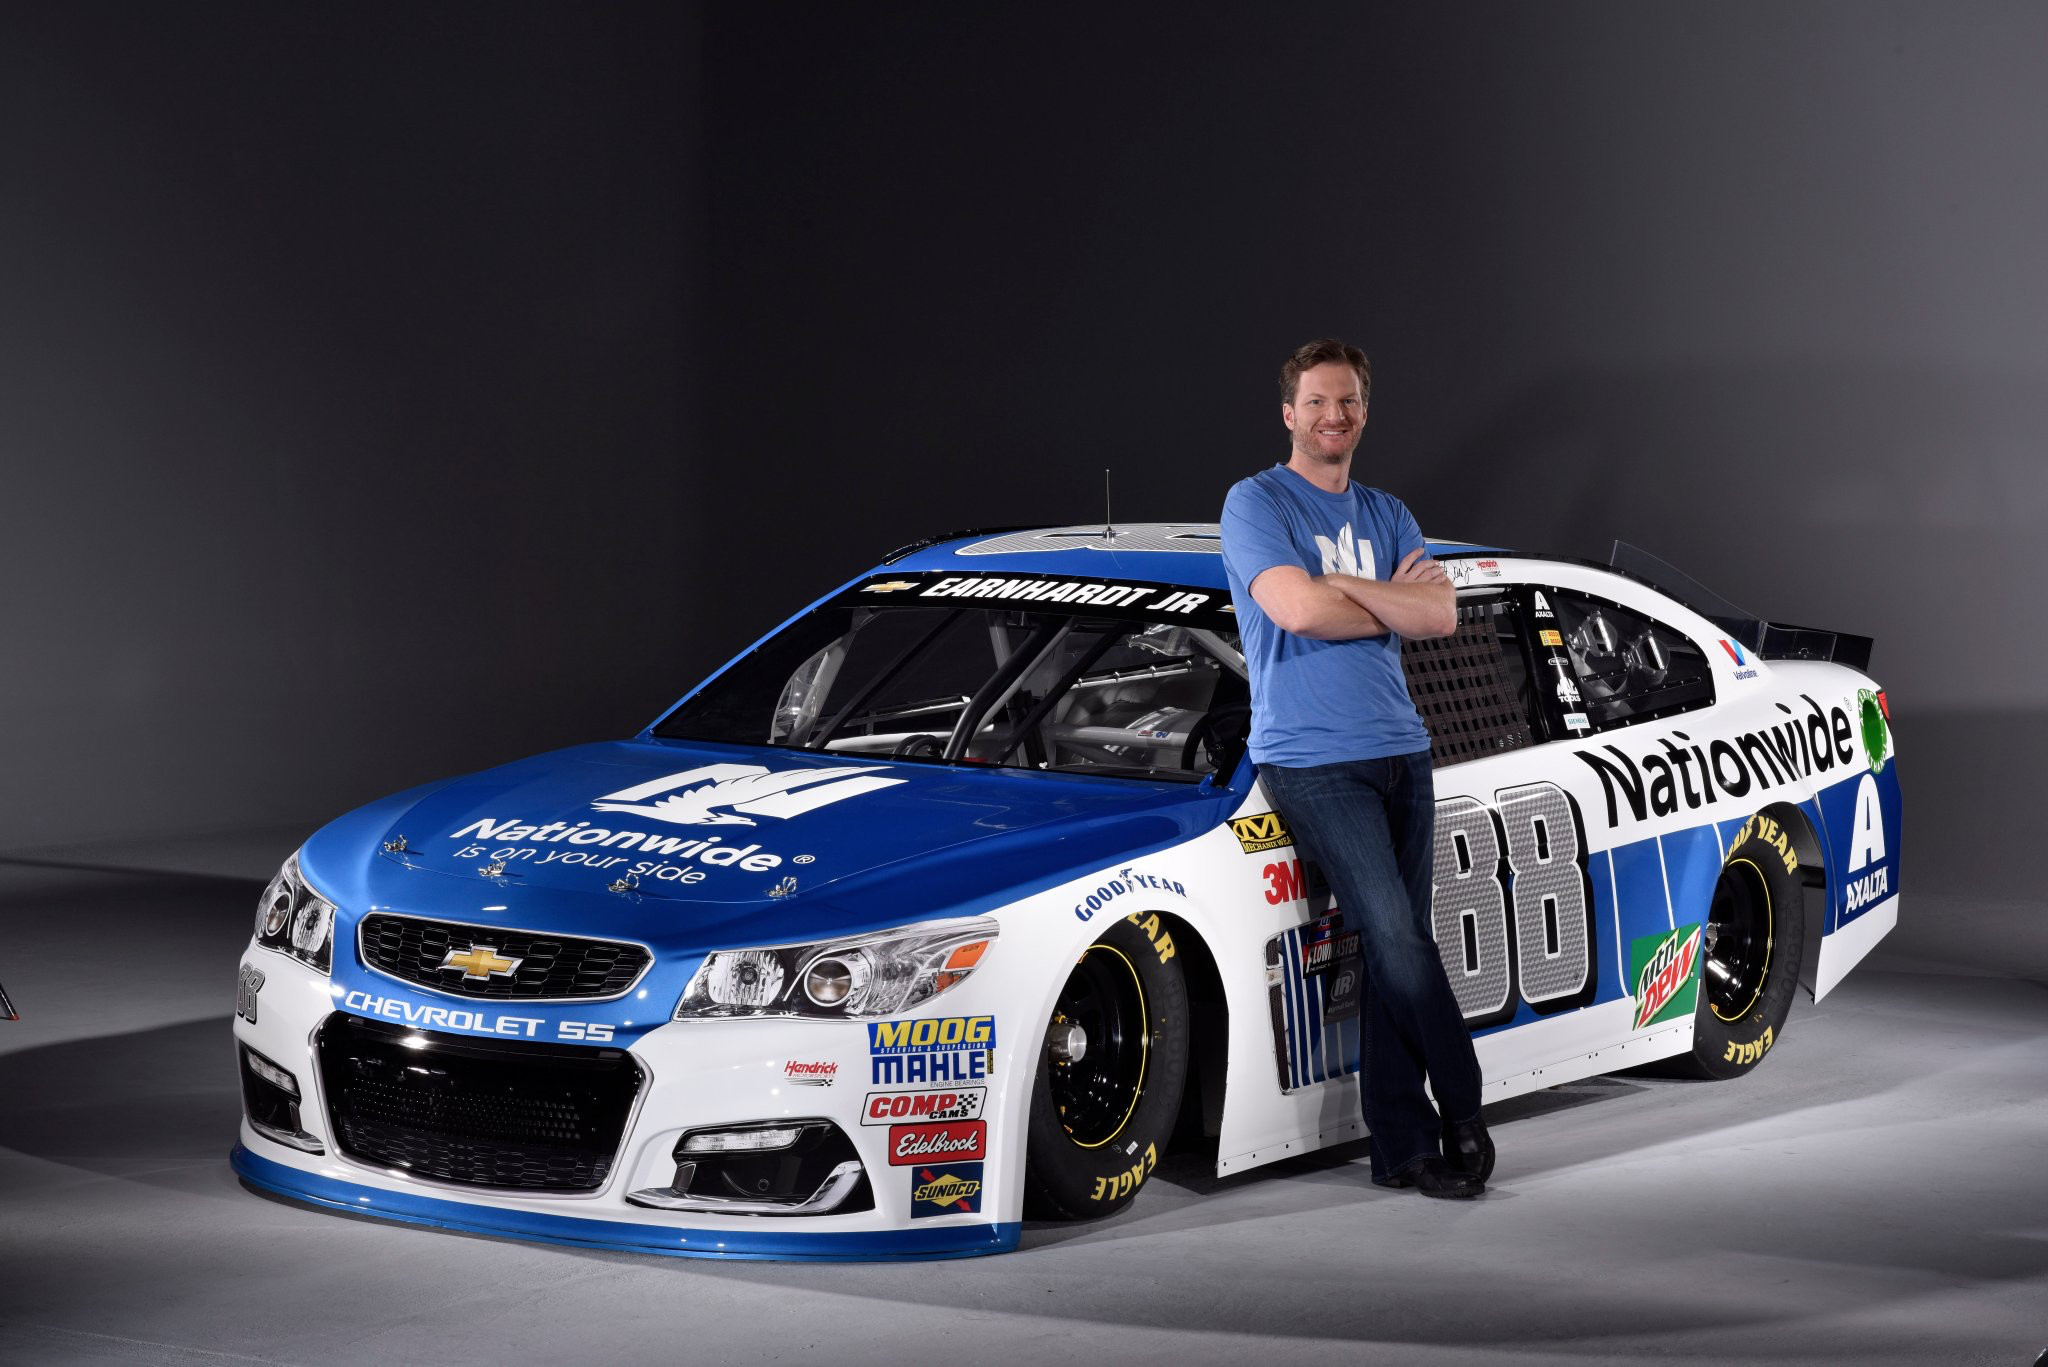 Dale Earnhardt Jr and his 88 Nationwide 2017 car